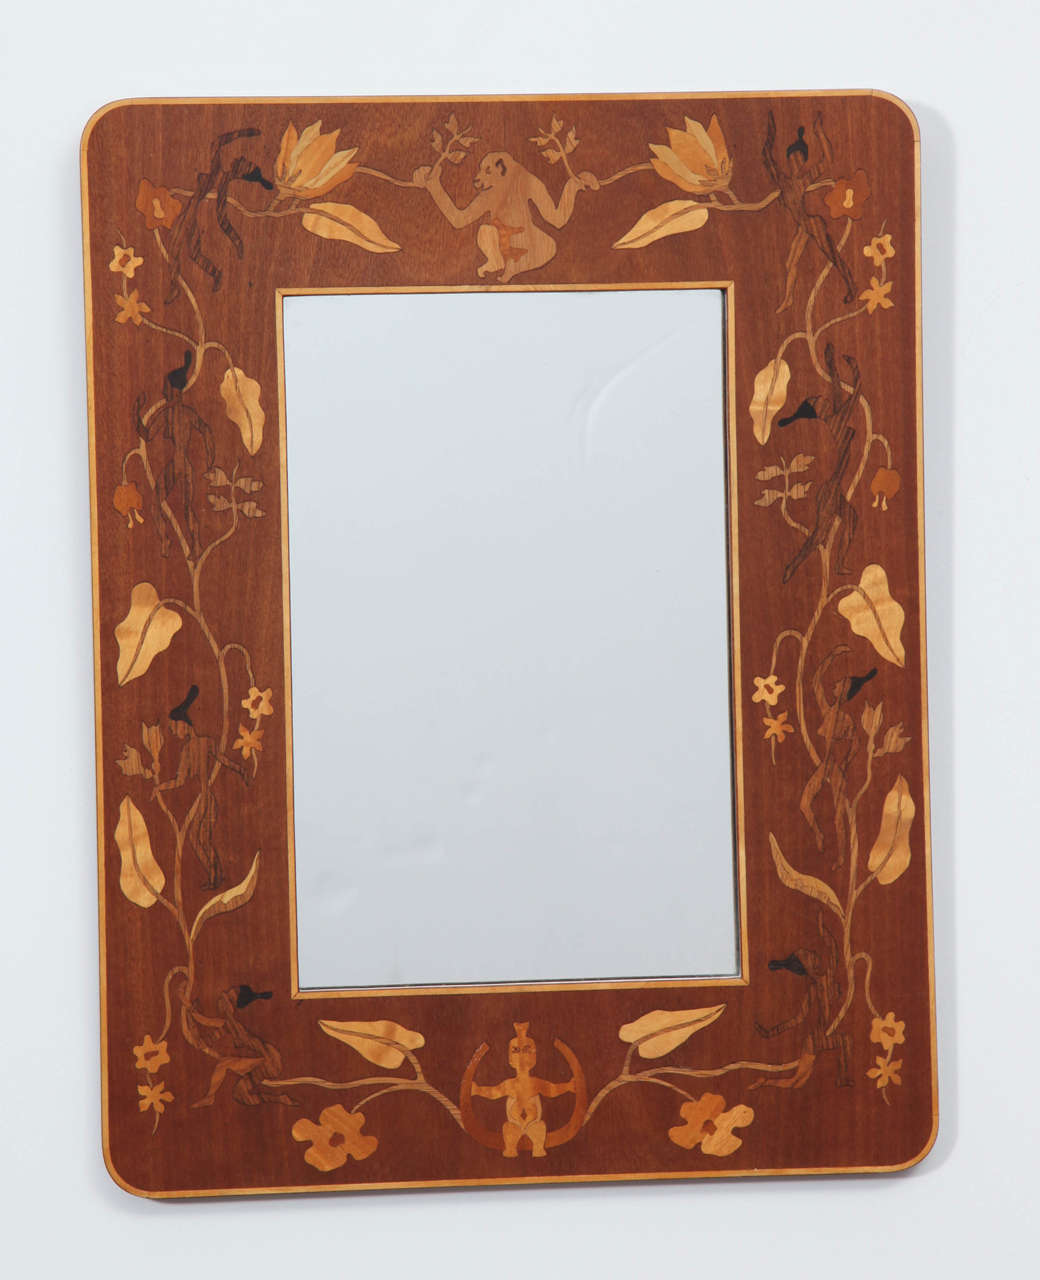 A pair of Swedish Grace inlaid mahogany mirrors, by G. Gerwall, circa 1930s, with a flat frame and rounded corners elaborately inlaid with fruitwood, lemonwood and walnut, depicting flowers, vines, apes and pigmy's. Paper label on verso.